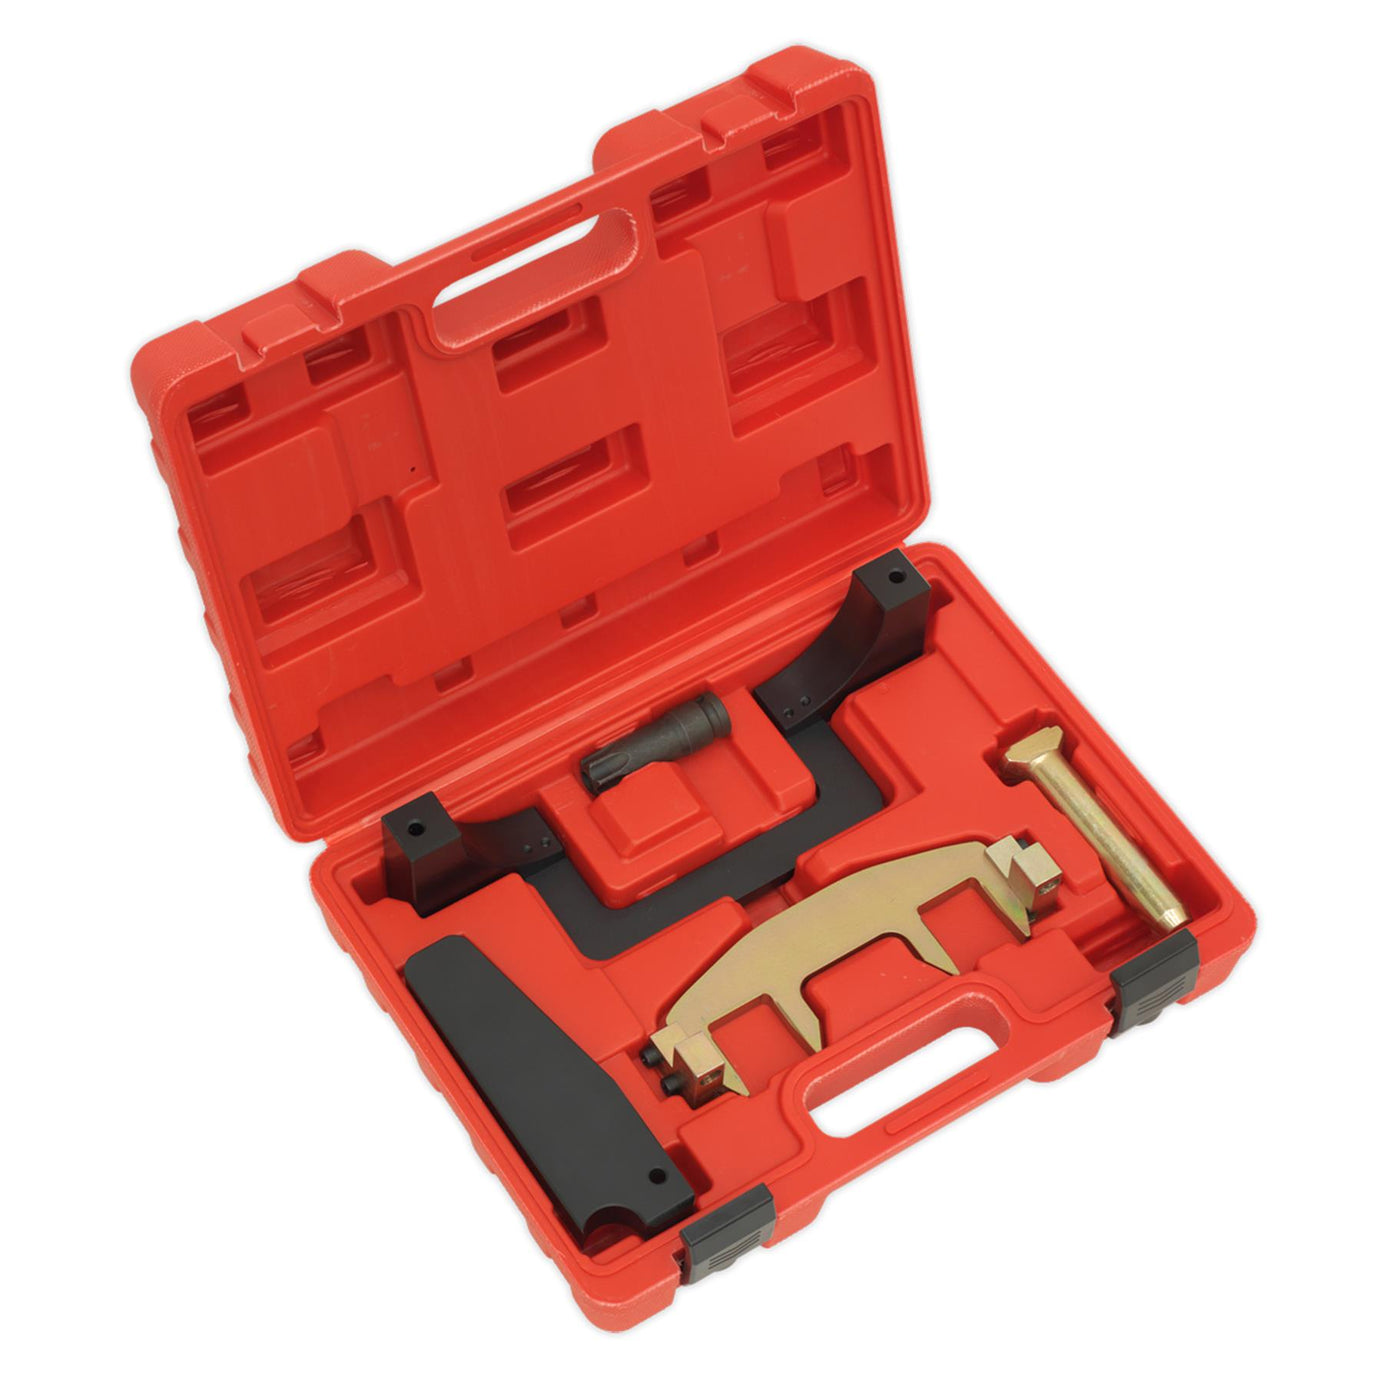 Sealey Pet Eng Timing Tool Kit - Mercedes 1.6, 1.8 - Chain Drive